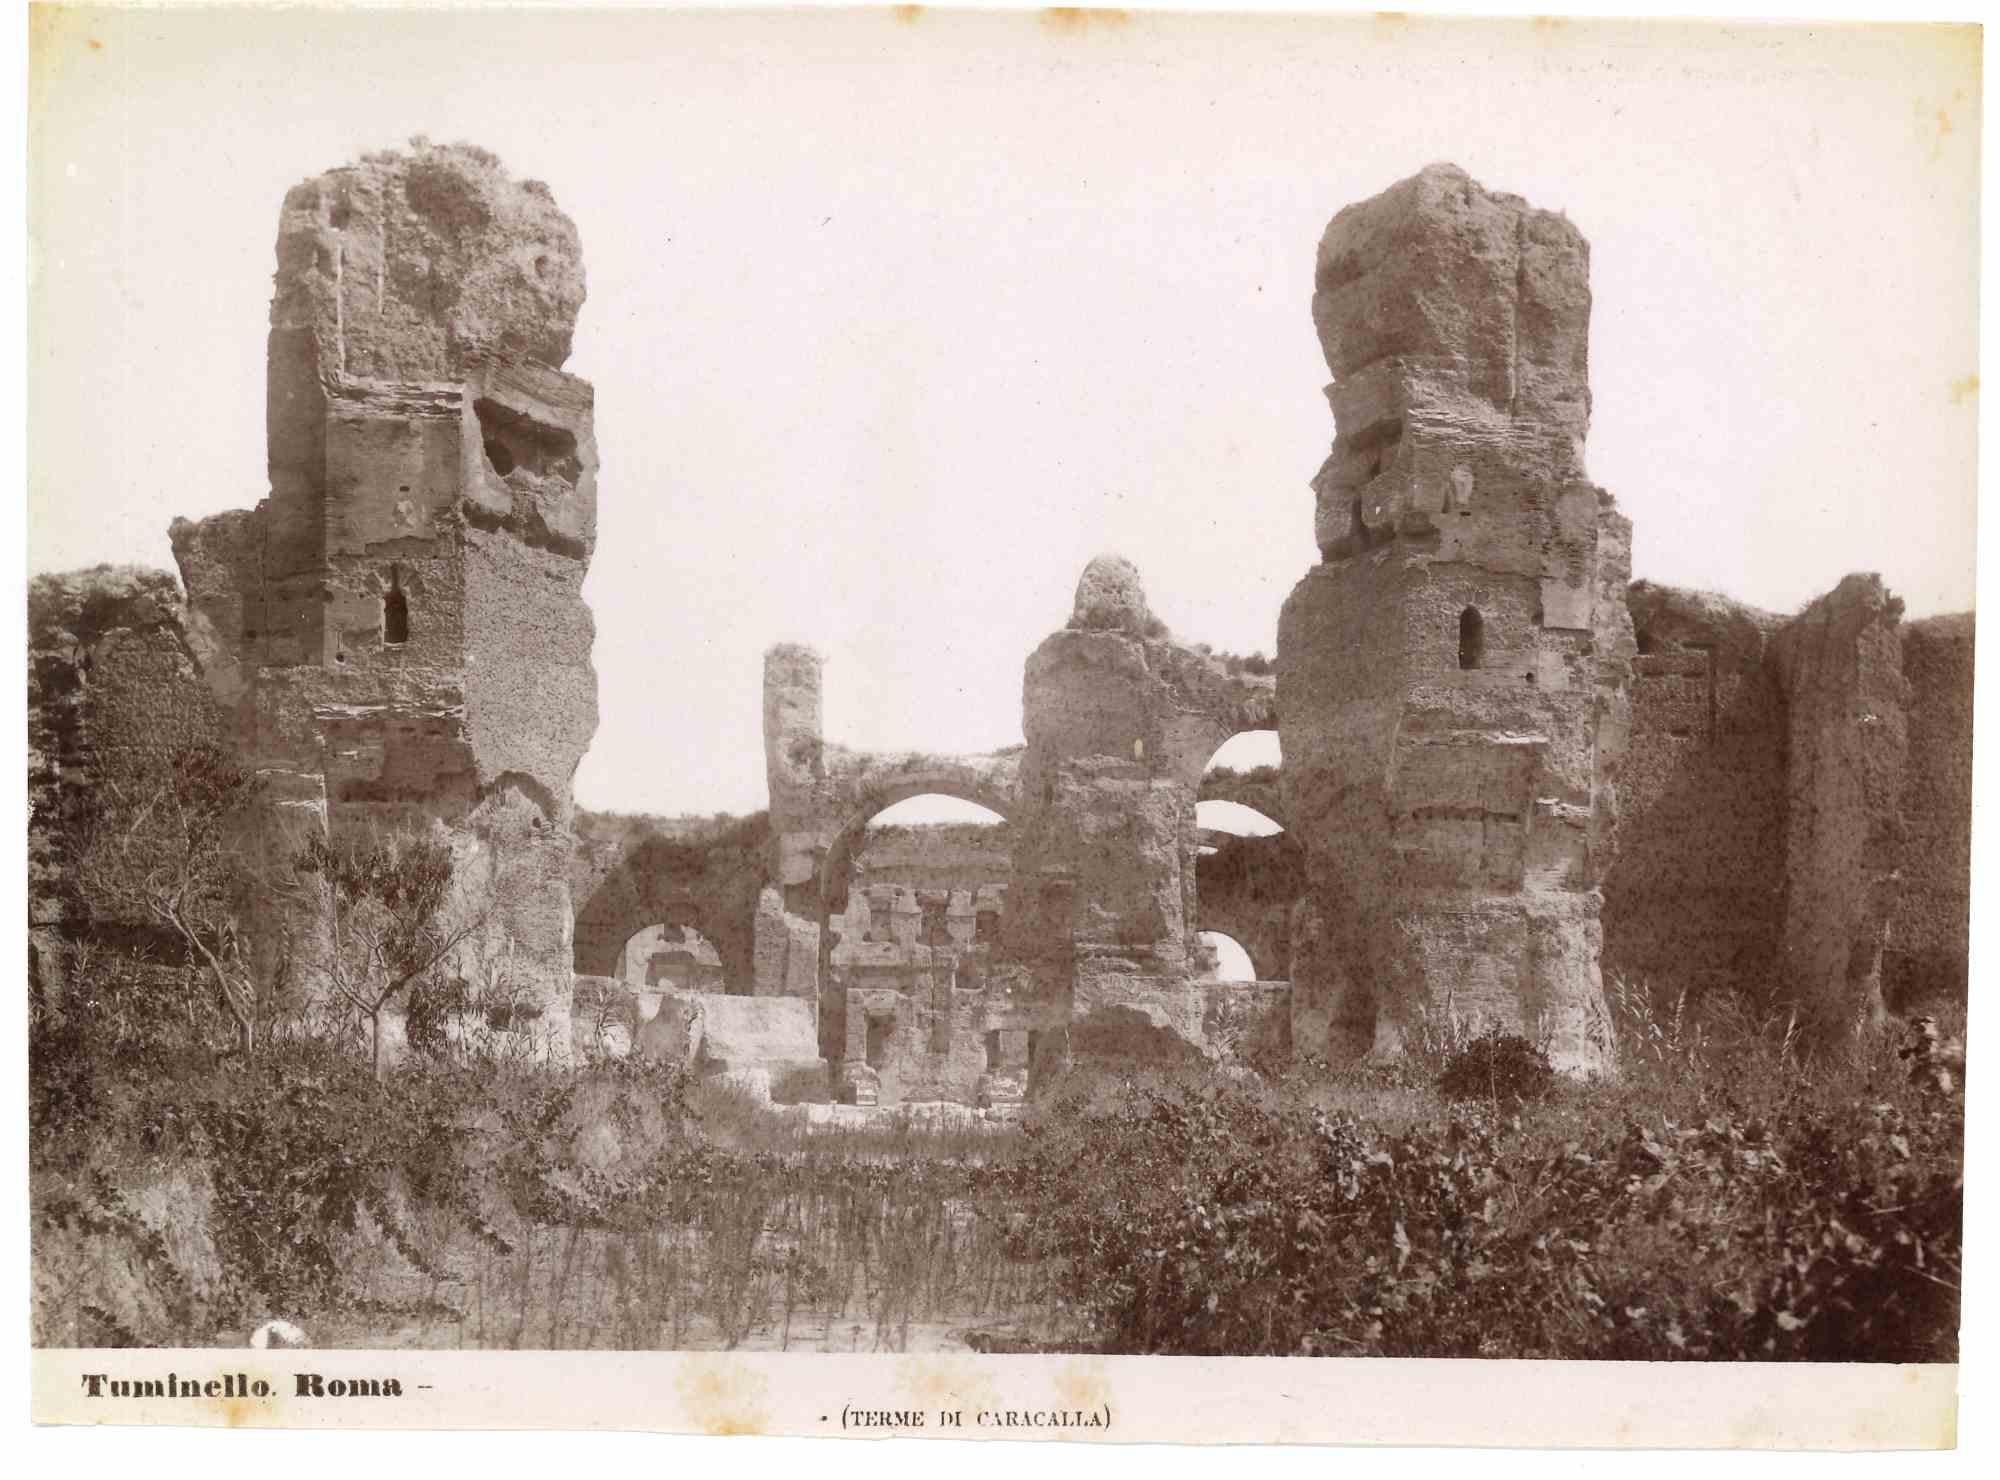 Unknown Figurative Photograph - Baths of Caracalla - Vintage Photograph - Early 20th Century